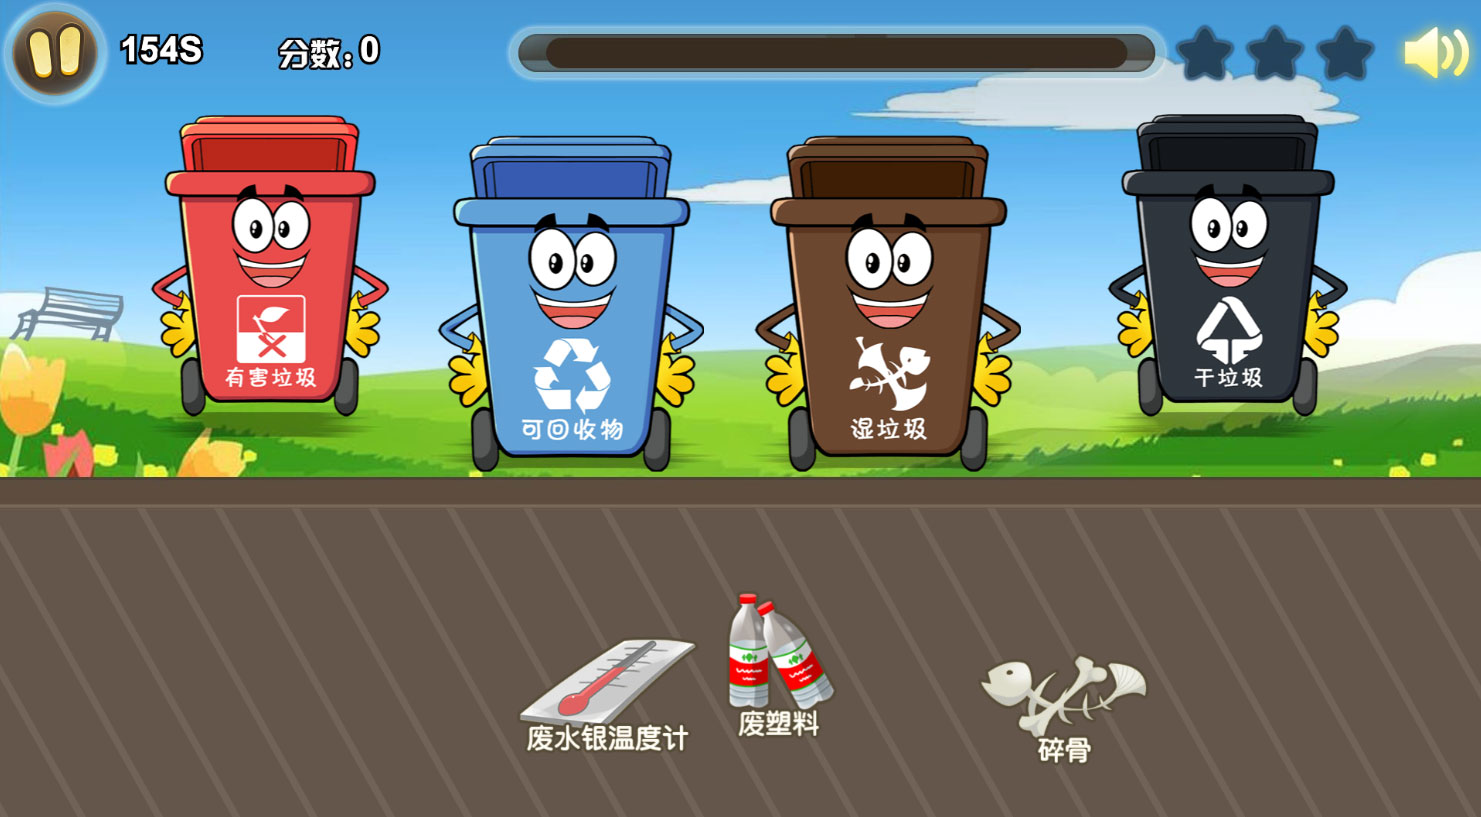 Test Your Garbage Sorting Skills with This Fun Game